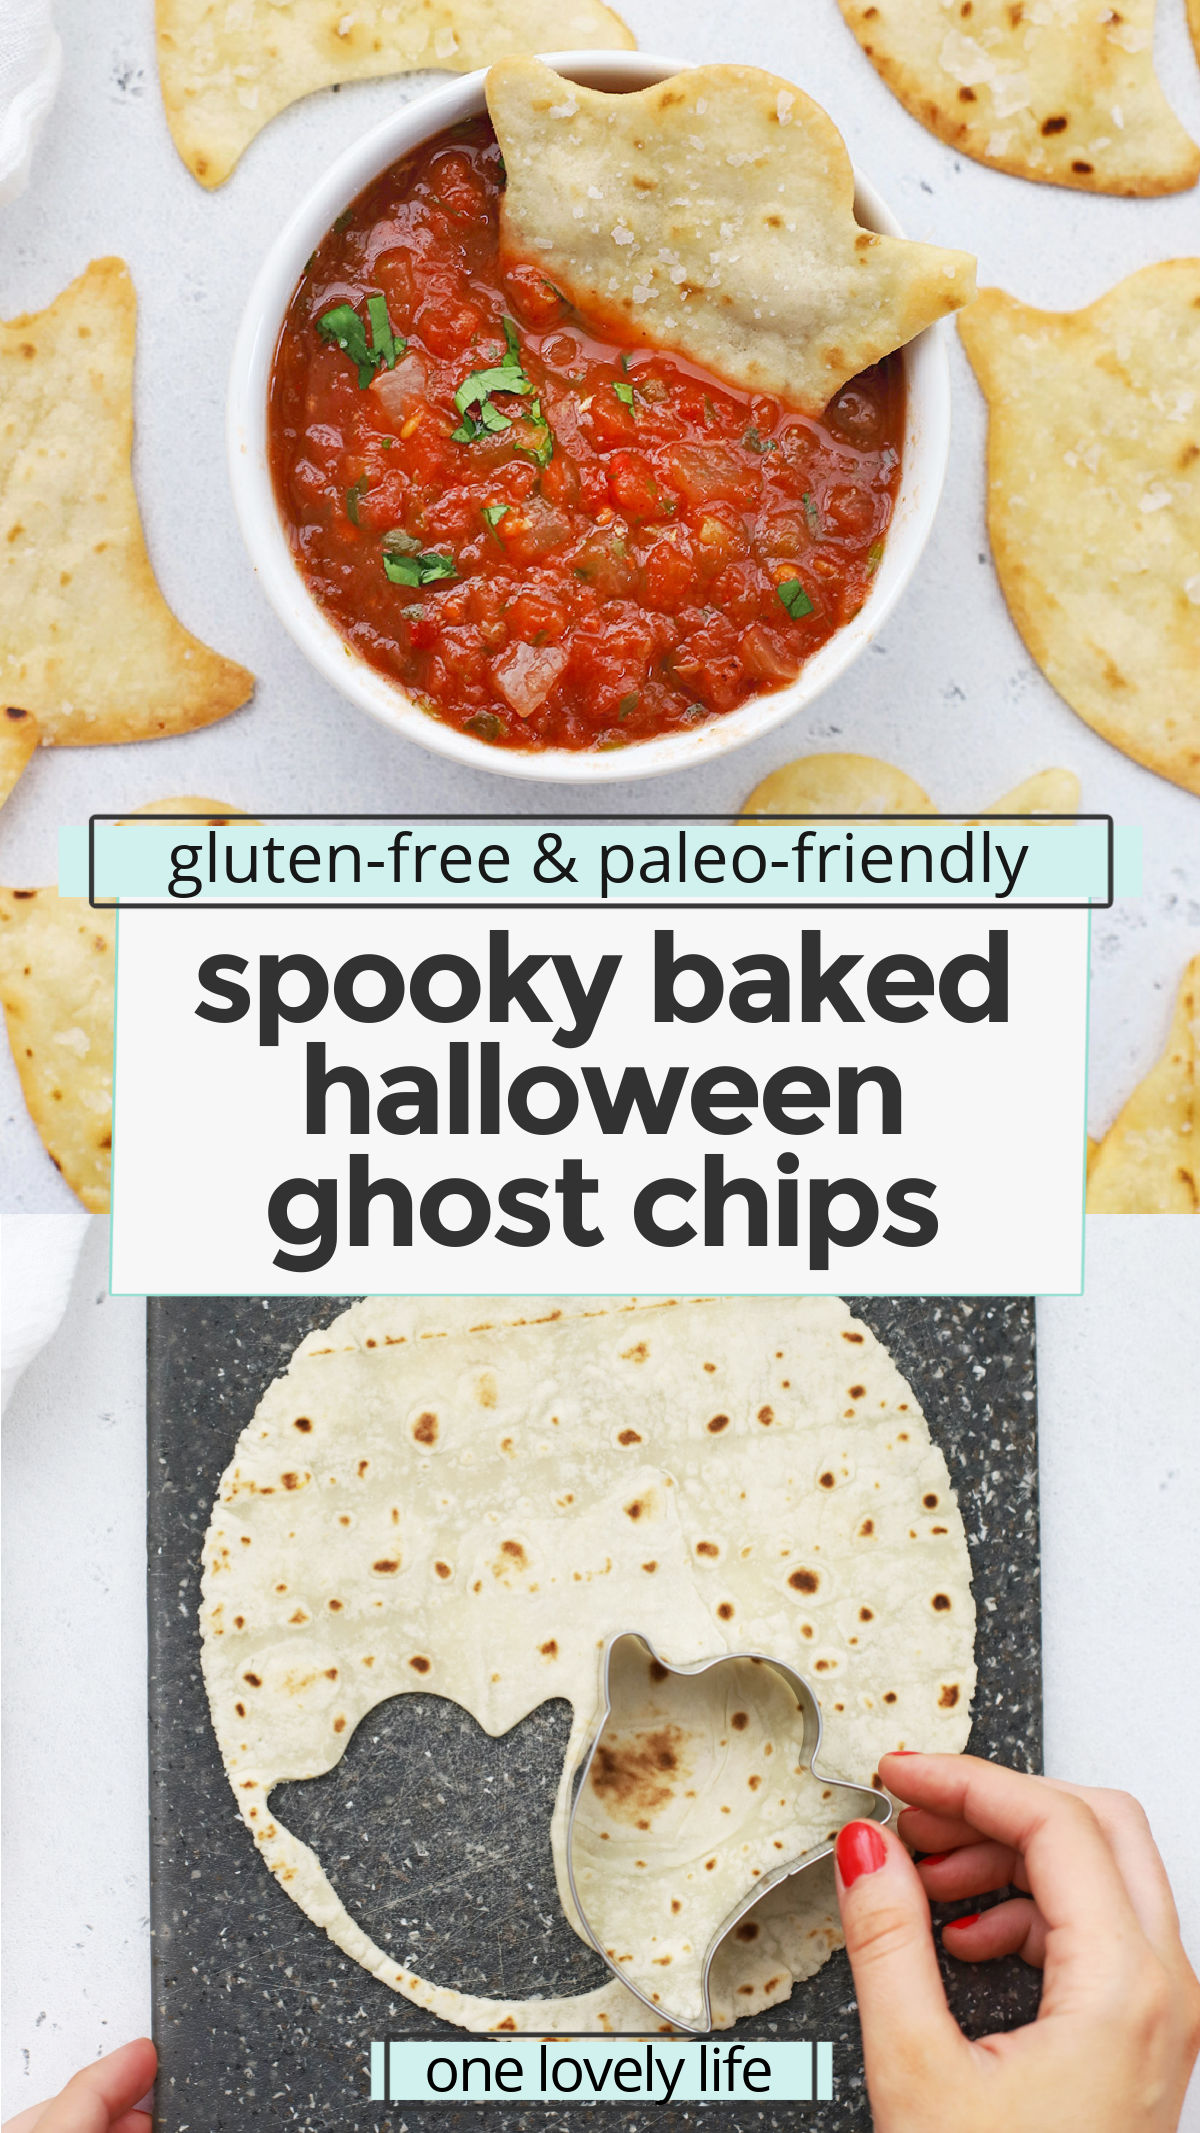 Spooky Baked Ghost Chips - You only need 15 minutes and 3 ingredients to make these adorable Halloween chips. The perfect spooky Halloween snack! Don't miss our favorite dips below! (Gluten-Free, Paleo-Friendly, Vegan-Friendly) // Halloween Snacks for Kids // Healthy Halloween Snack // Baked Ghost Chips // Halloween Chips